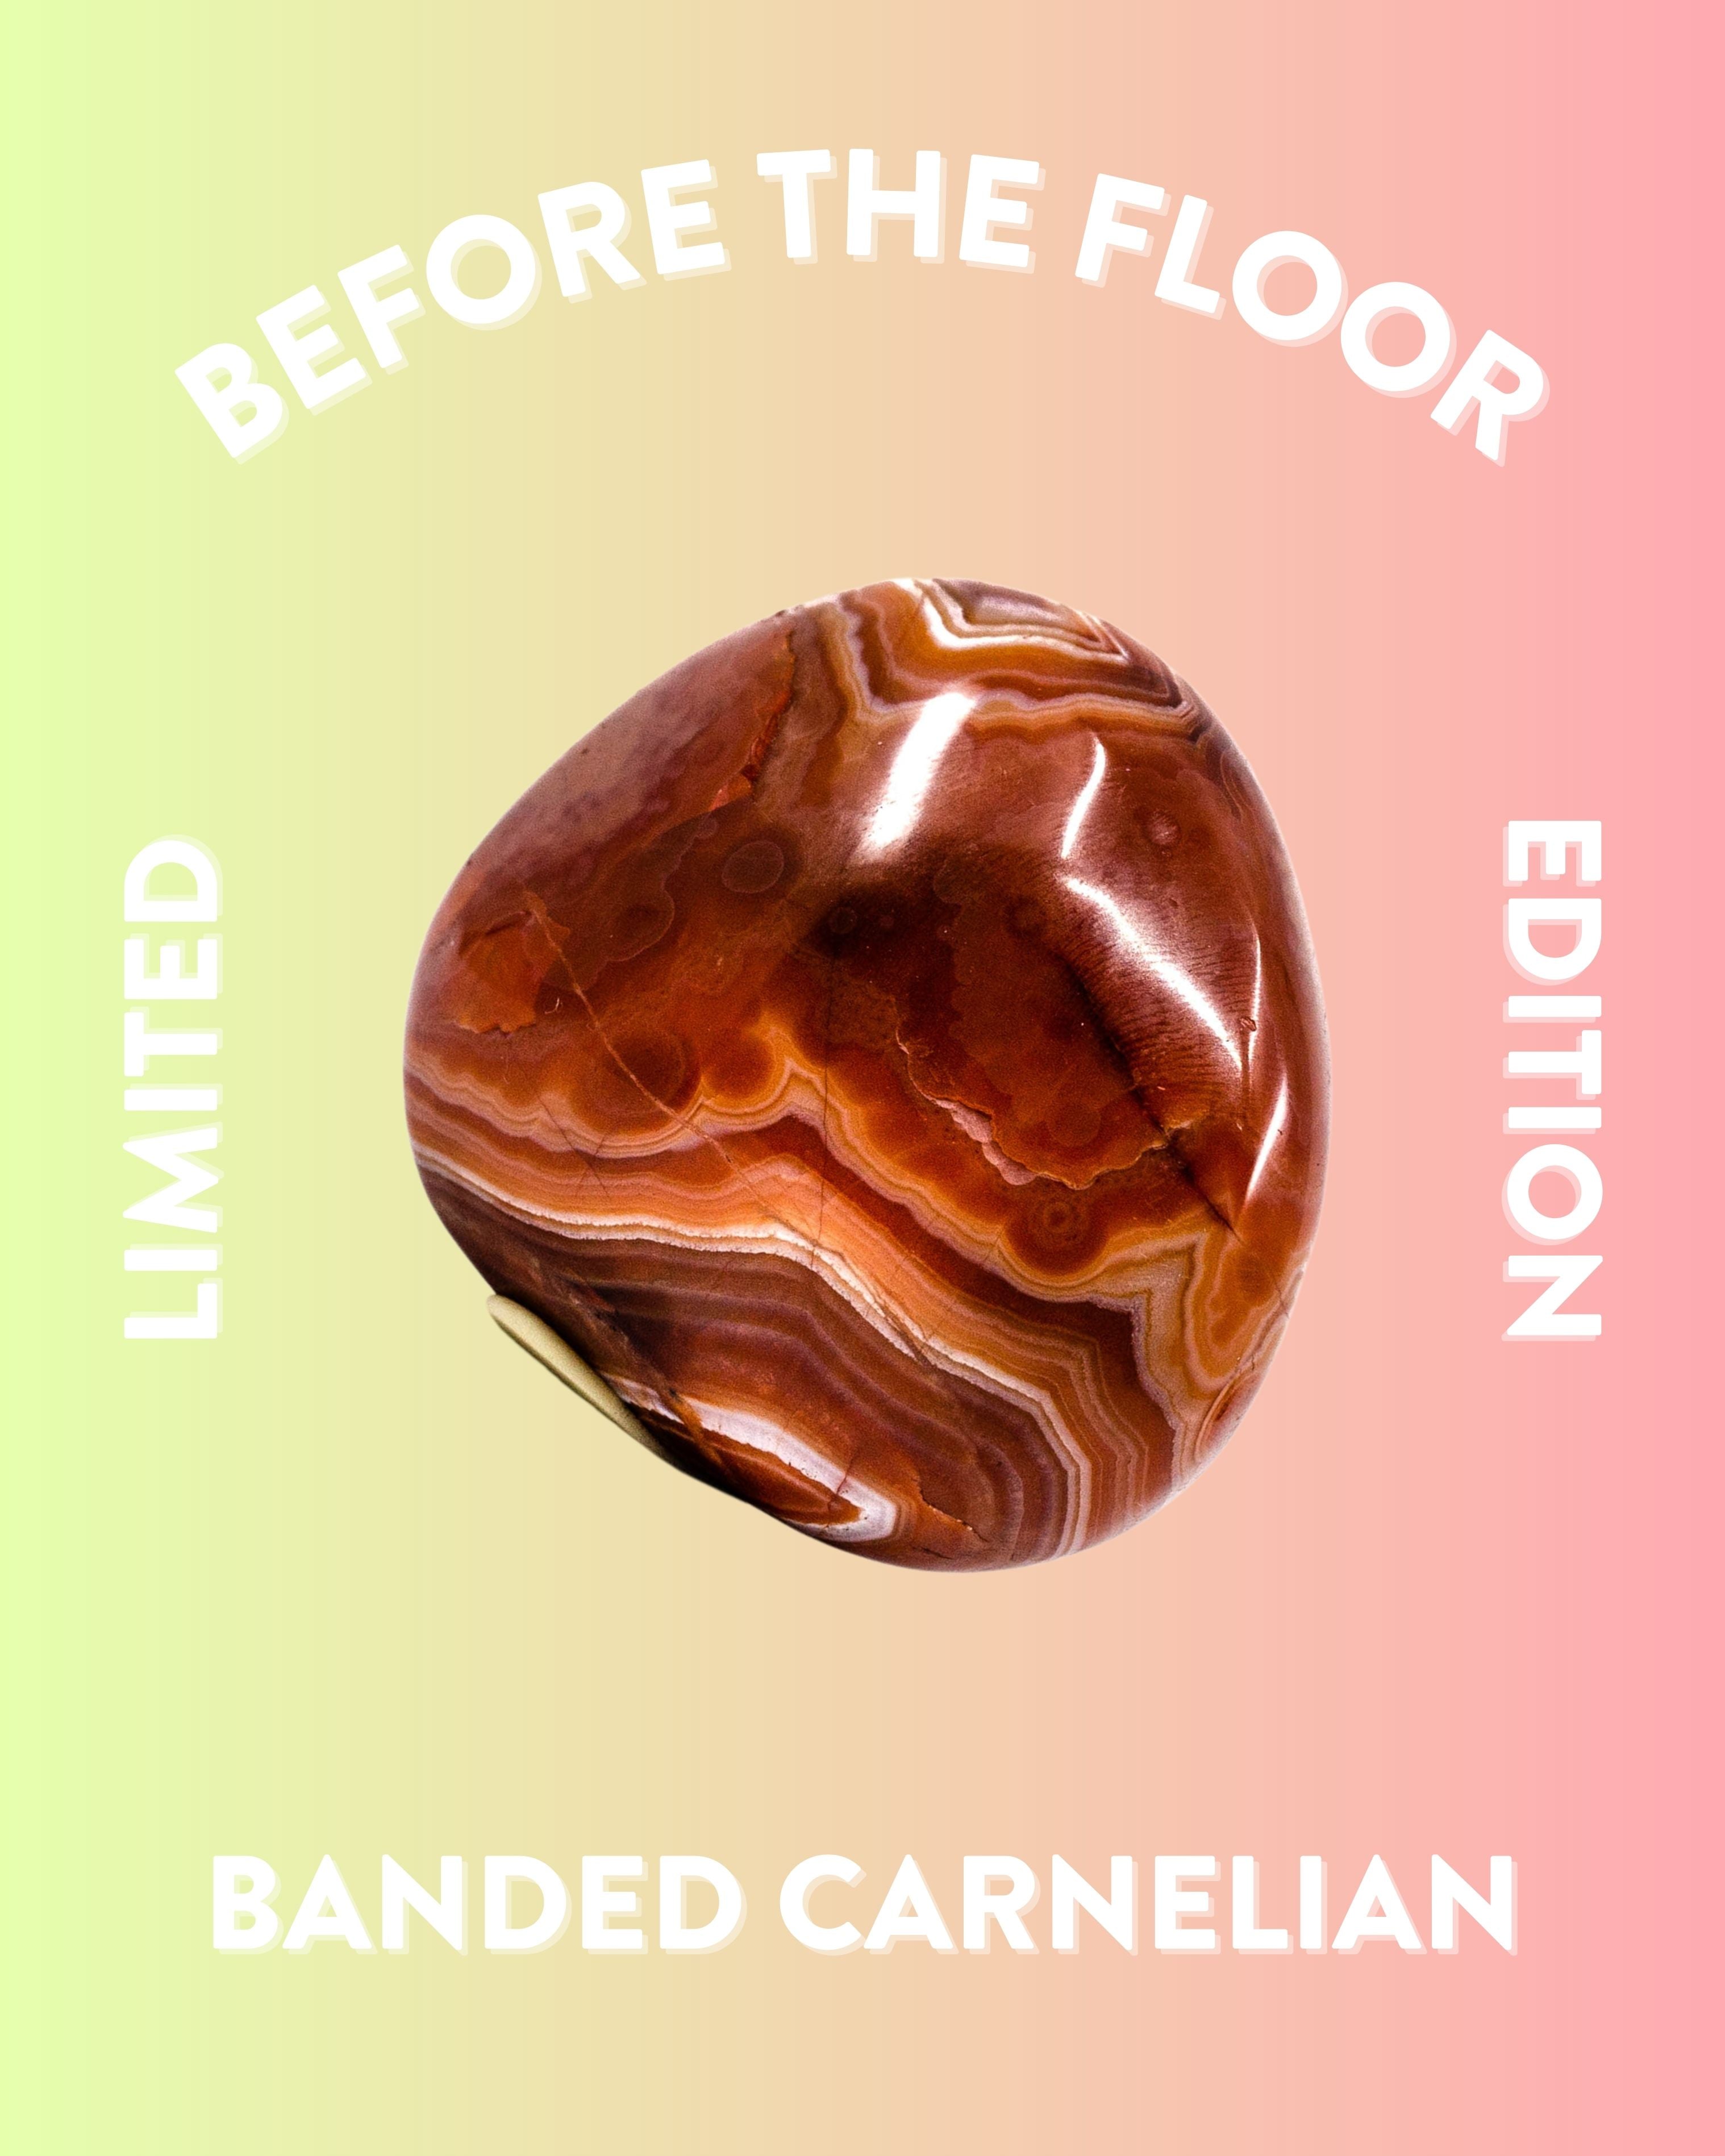 Banded Carnelian Pebbles - Before the Floor